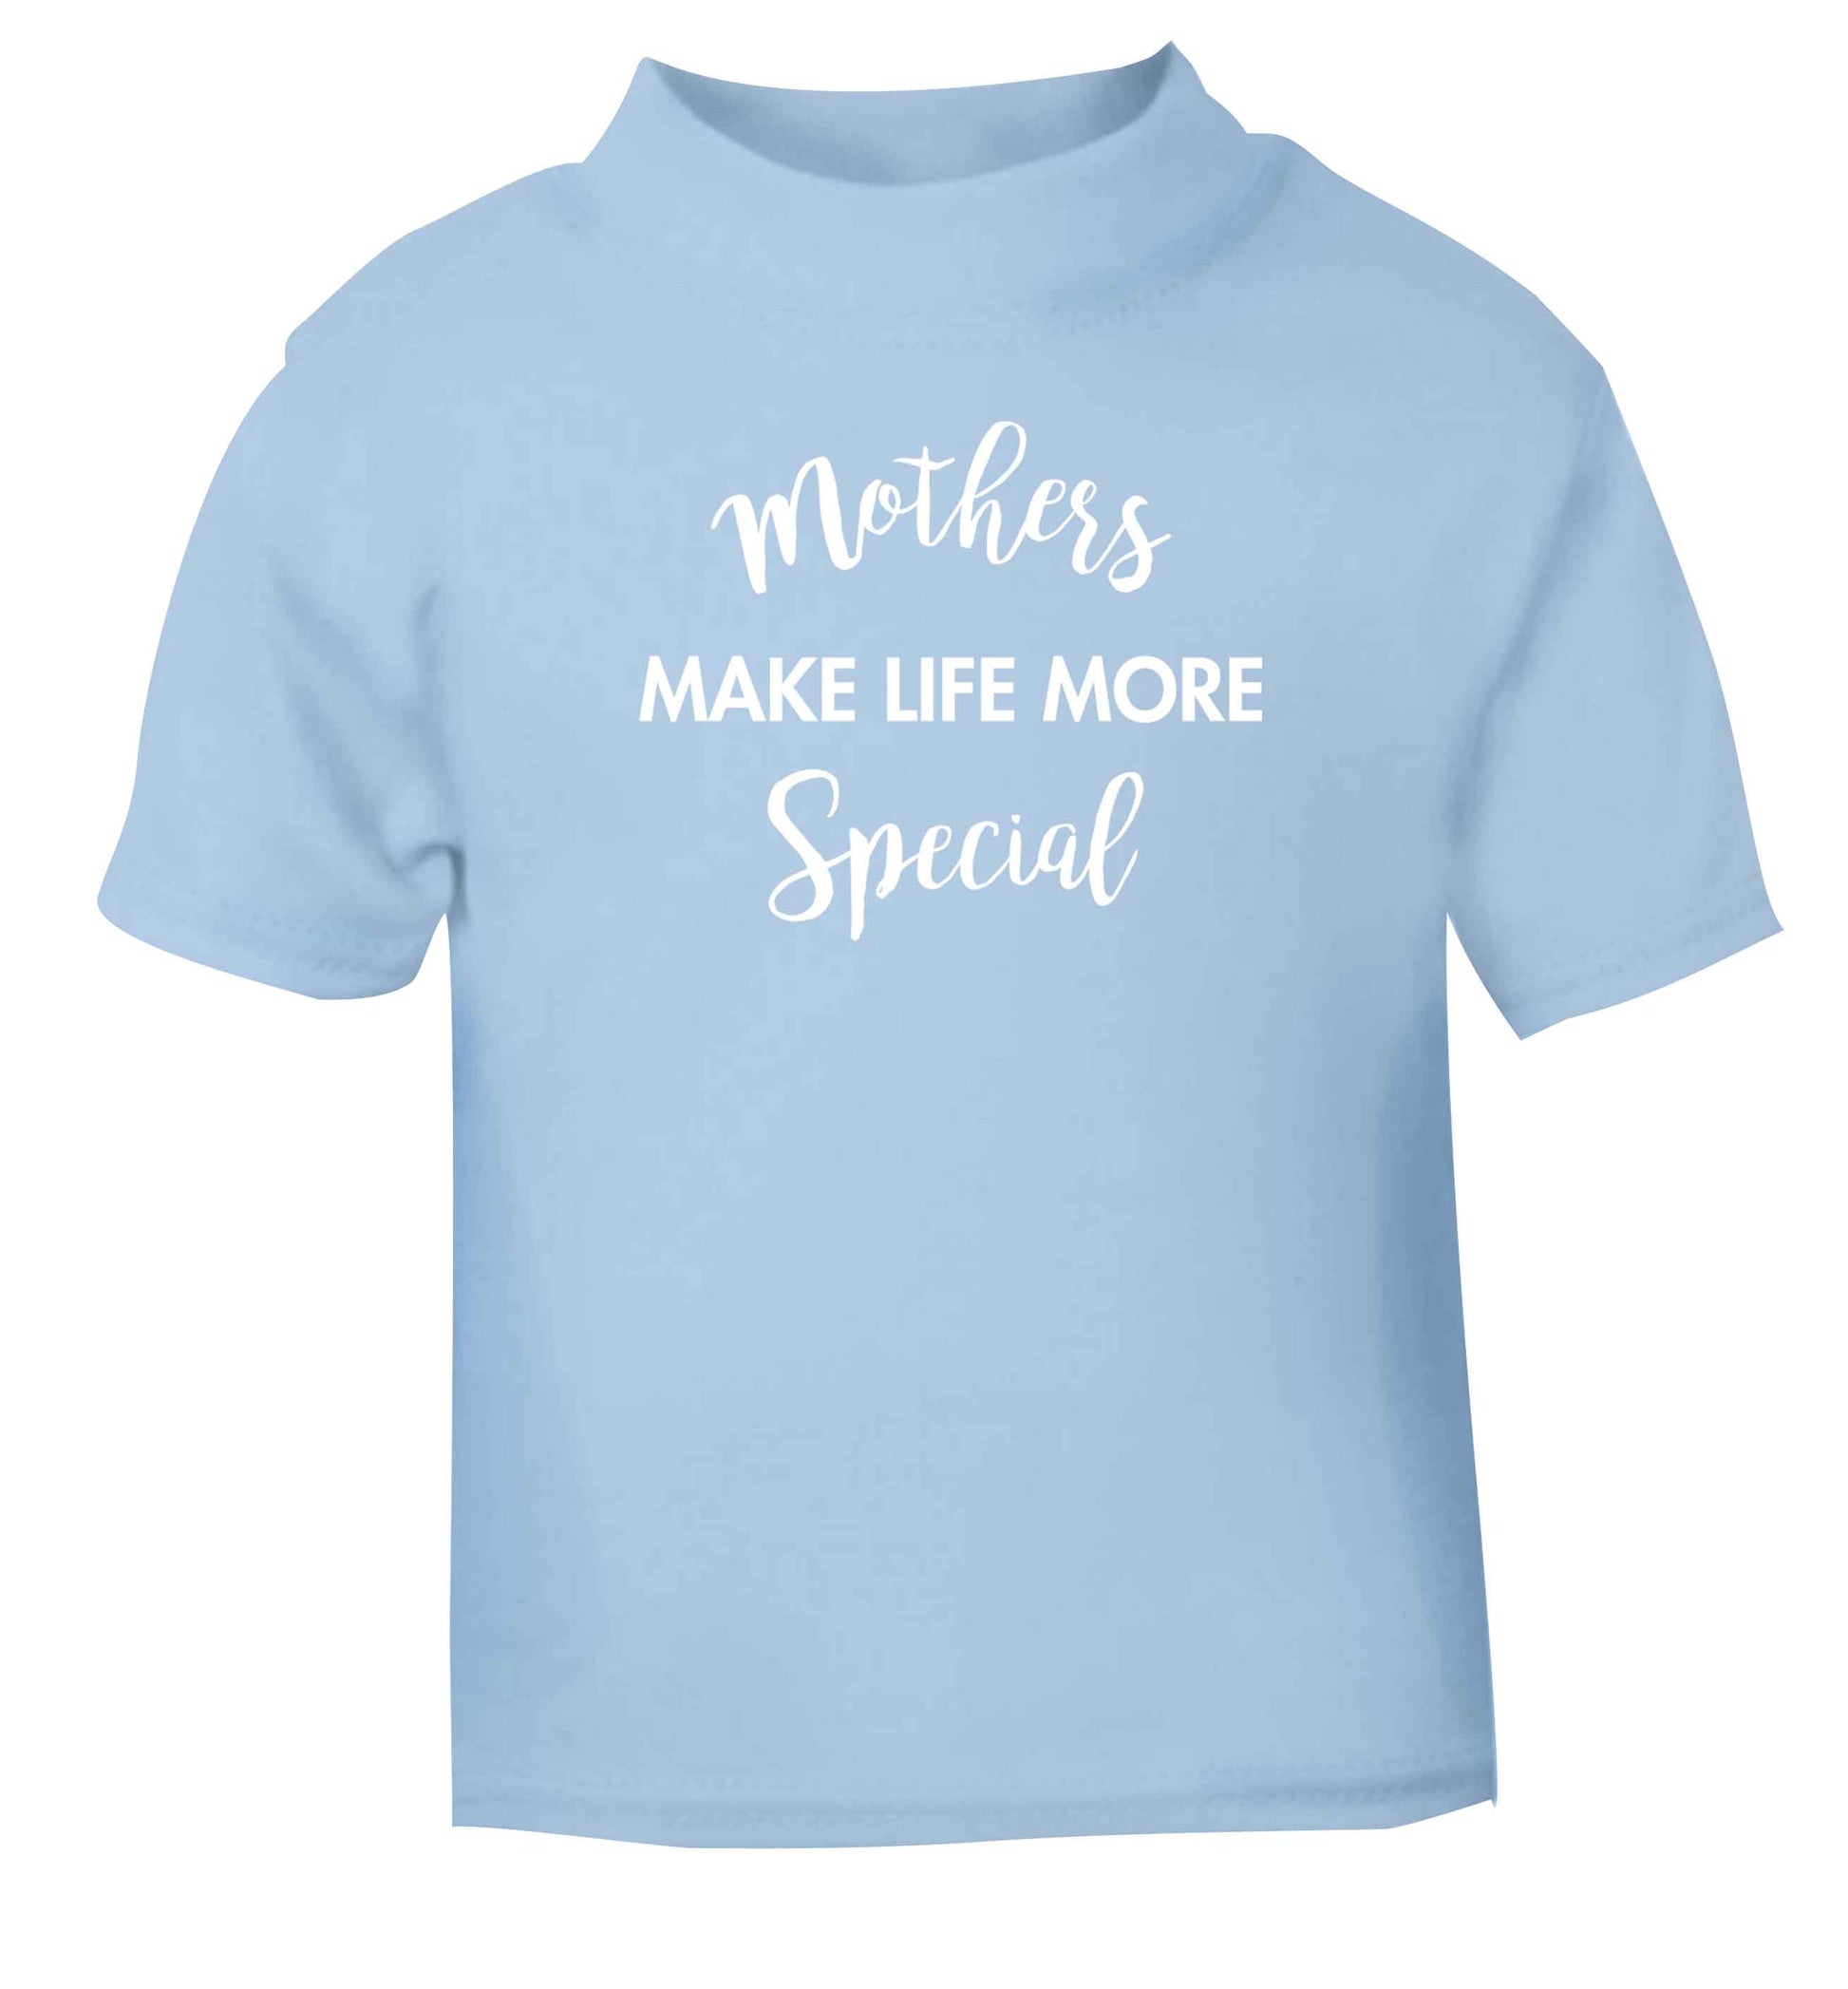 Mother's make life more special light blue baby toddler Tshirt 2 Years